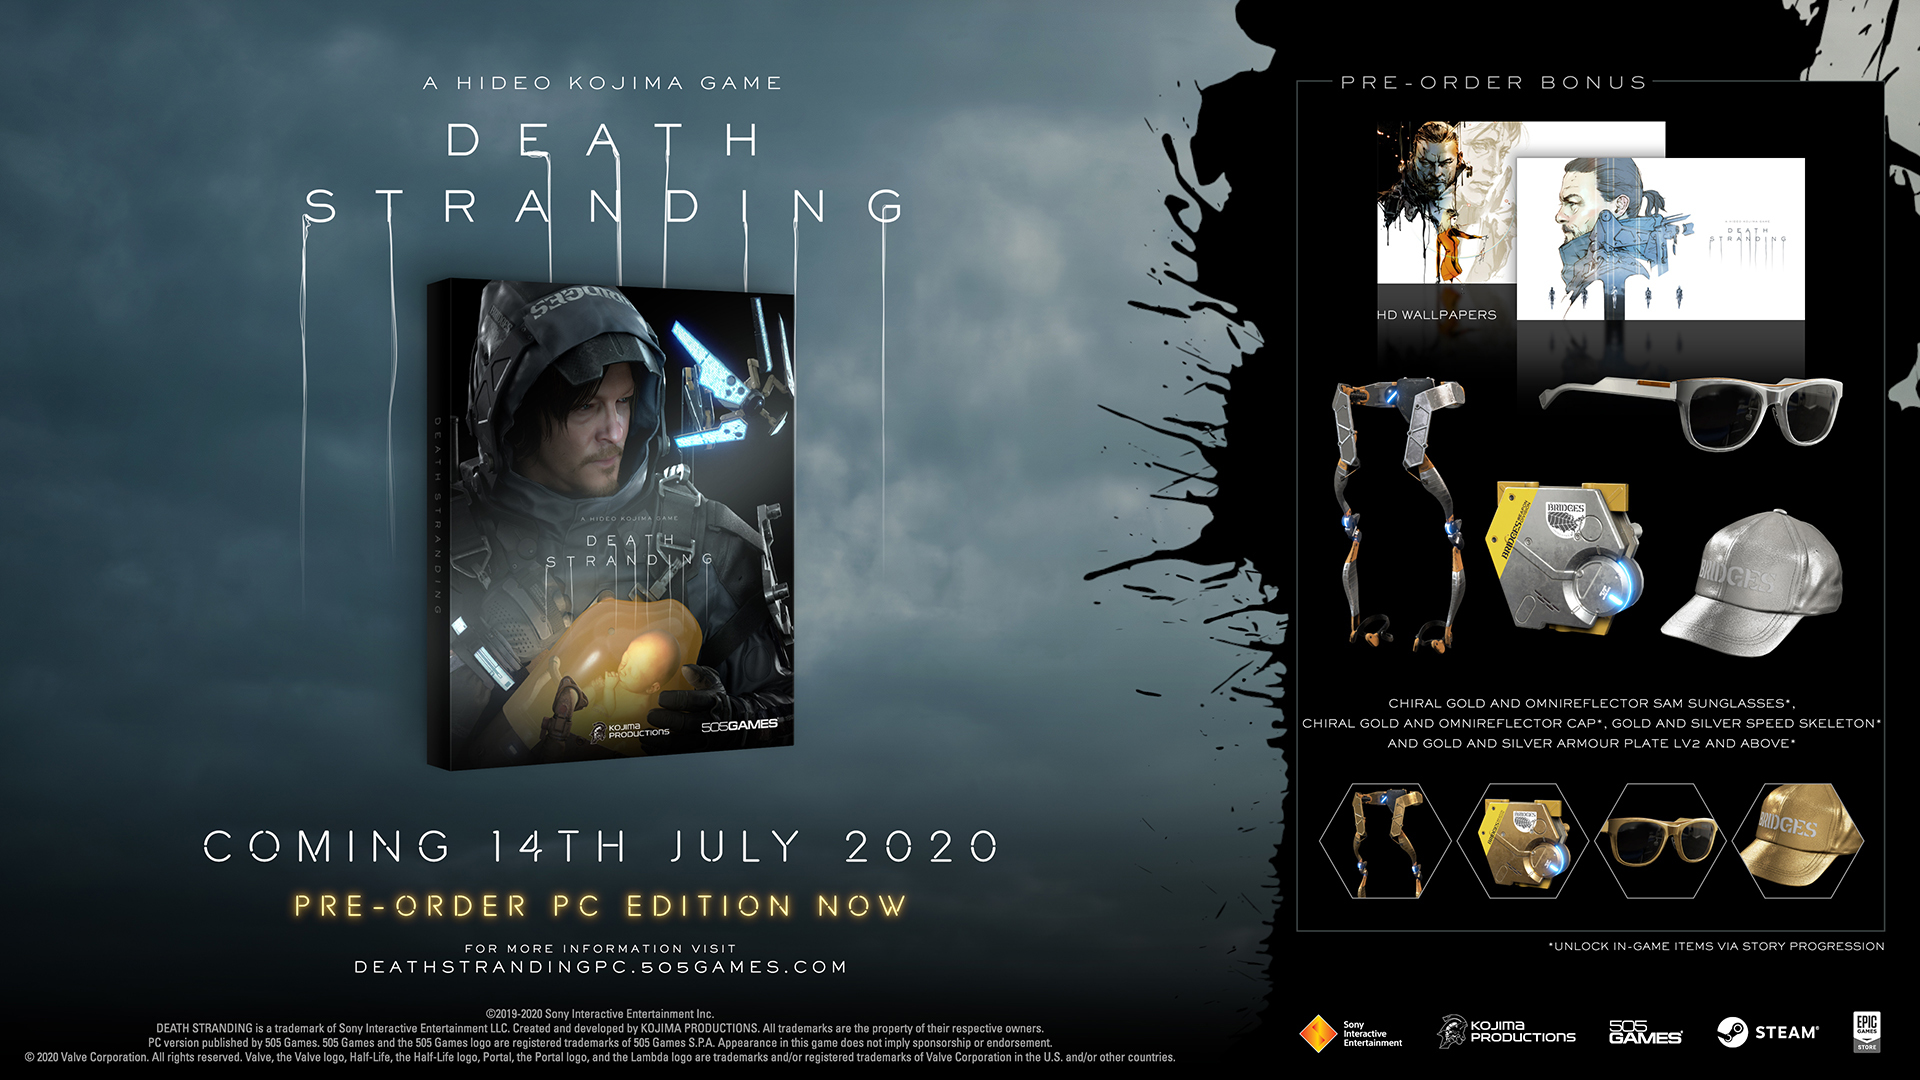 Water is going to play a key role in Death Stranding 2 and here's why : r/ DeathStranding